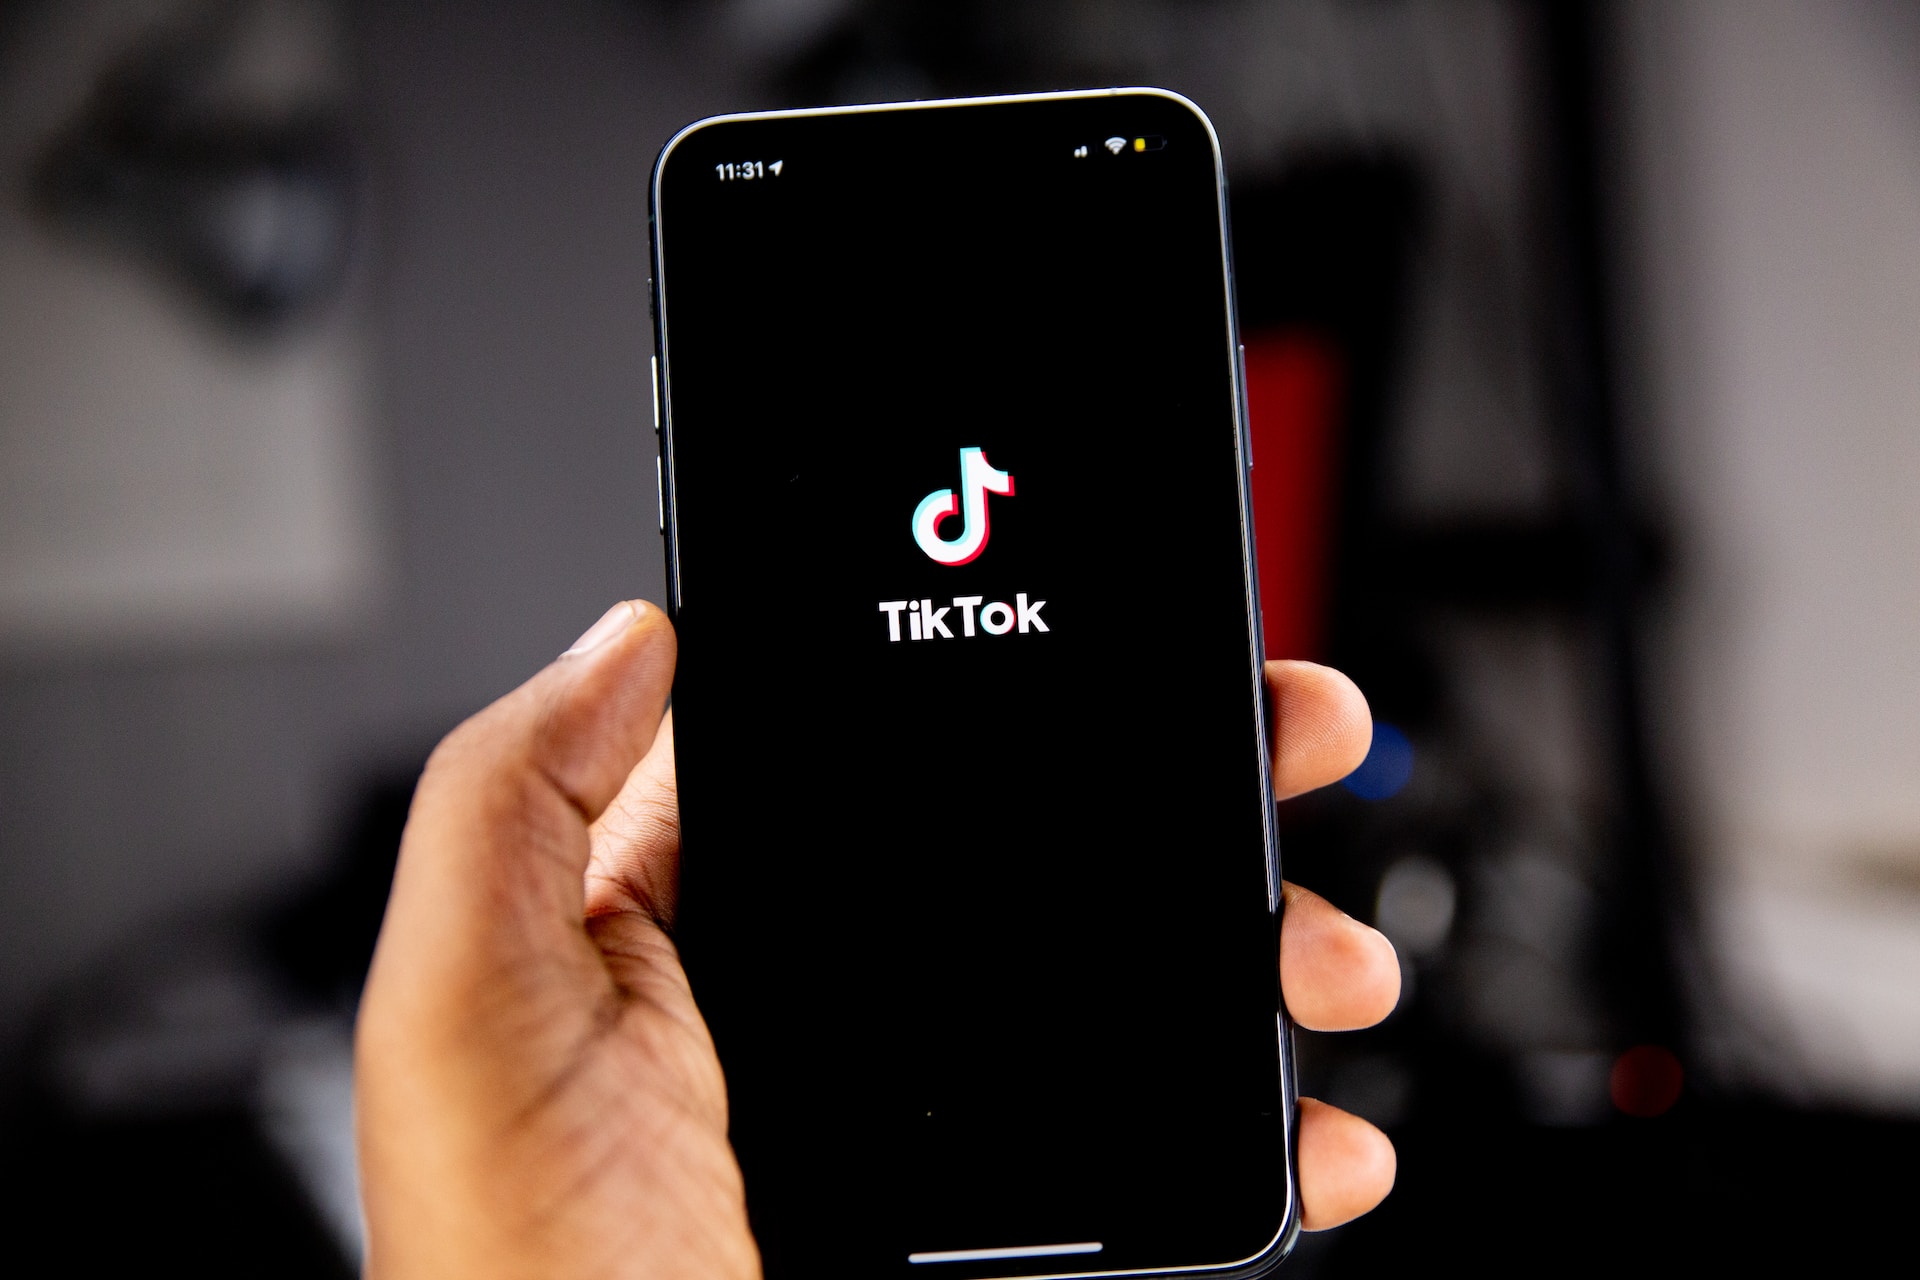 TikTok employees were sharing users' personal information in internal chatrooms.